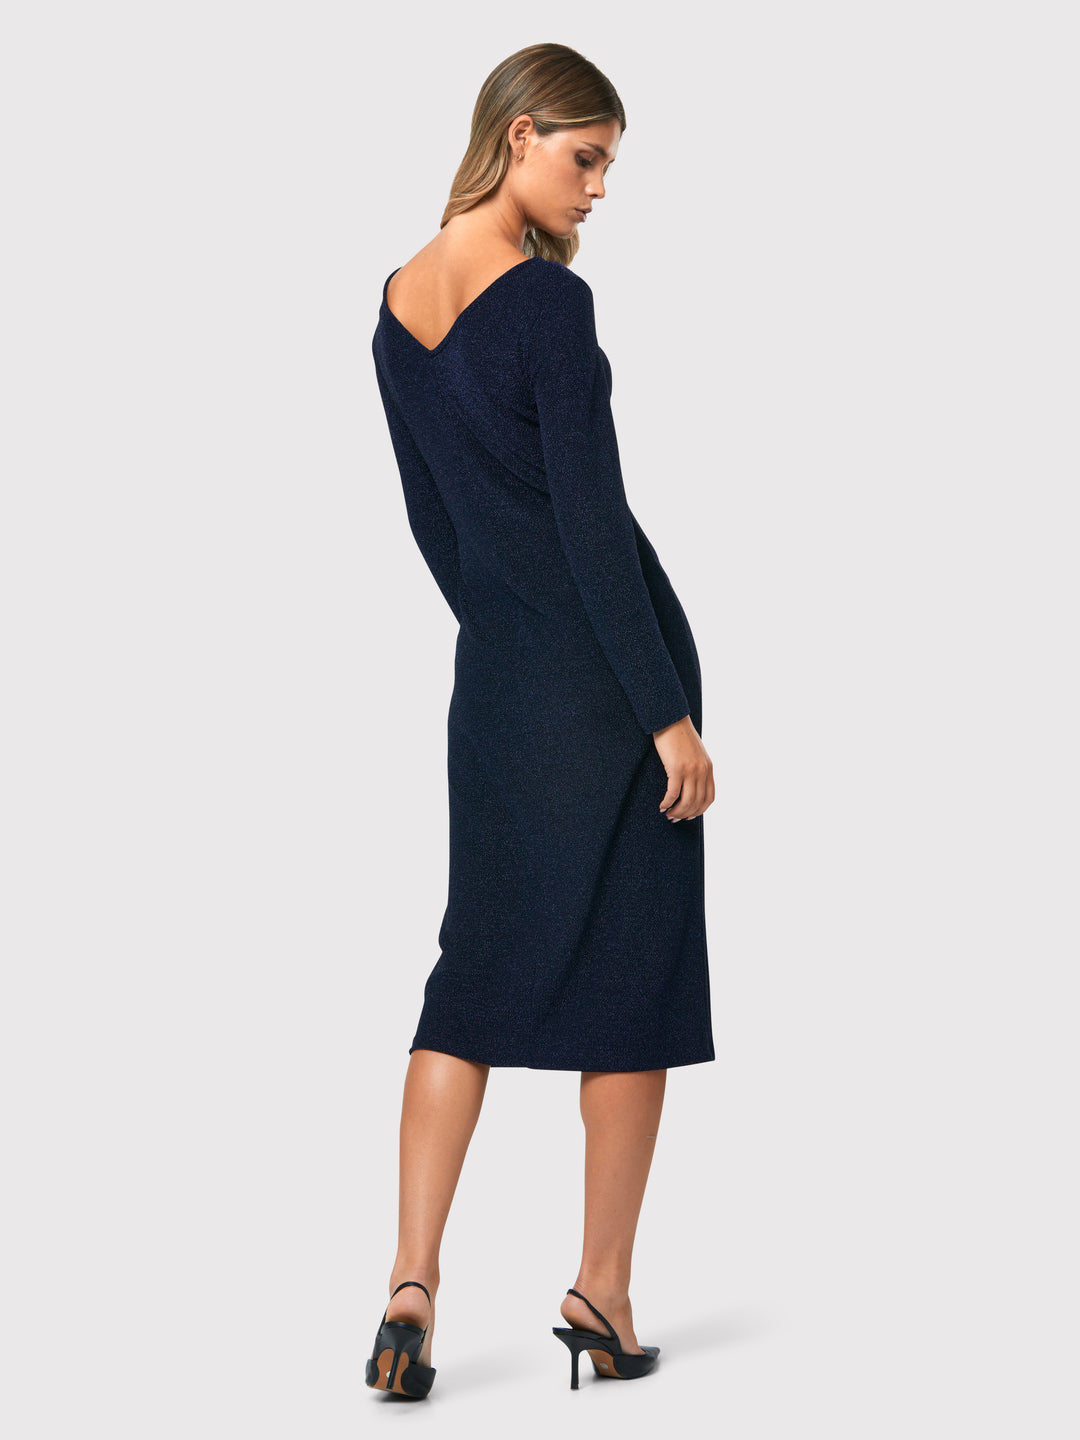 Introducing the Jamie Midnight Shimmer Dress, a captivating bodycon dress that exudes timeless elegance. This dress features super full-length sleeves, providing a sophisticated and chic look. Crafted from a sparkly navy jersey fabric, it adds a touch of glamour to your ensemble. The slash neck with a slight V-back detail adds a subtle hint of allure. 